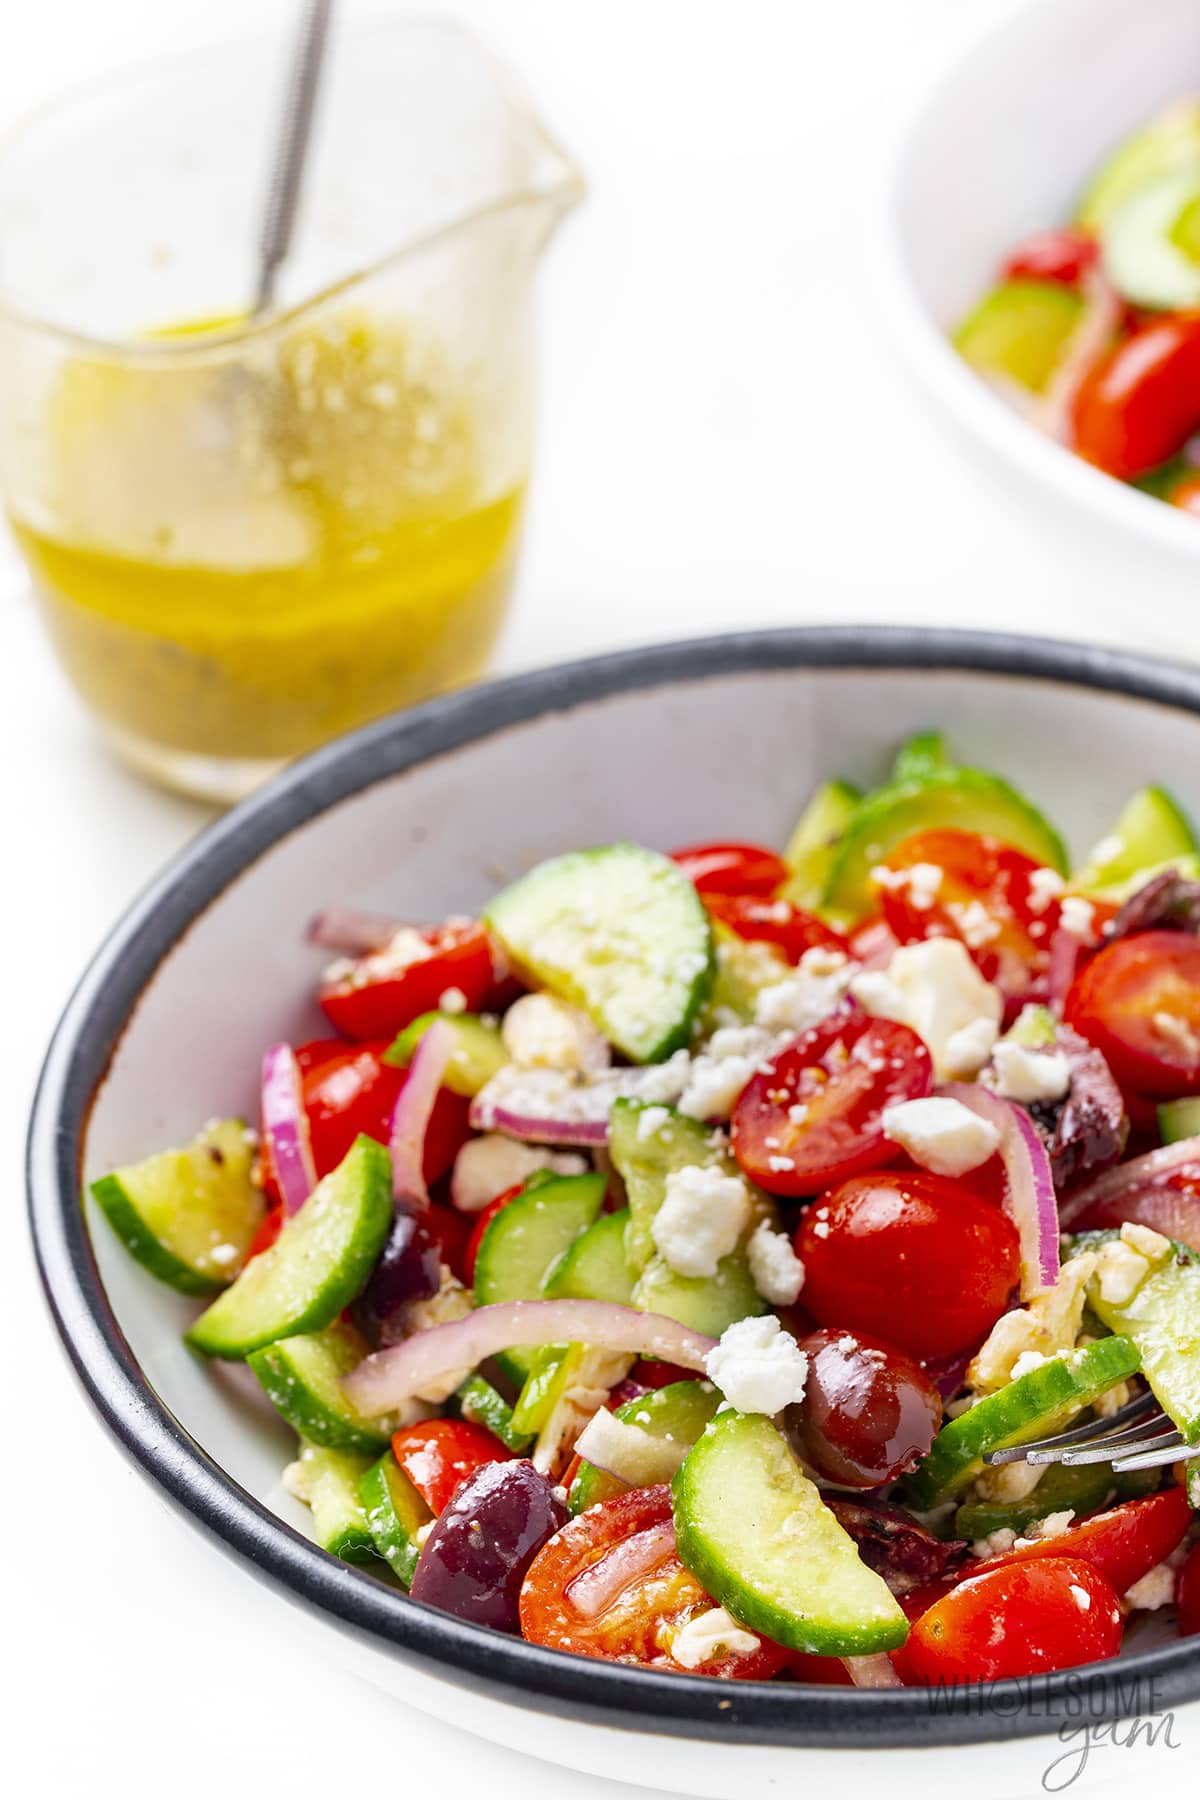 Traditional Greek salad (horiatiki salad) in a bowl with dressing in background.